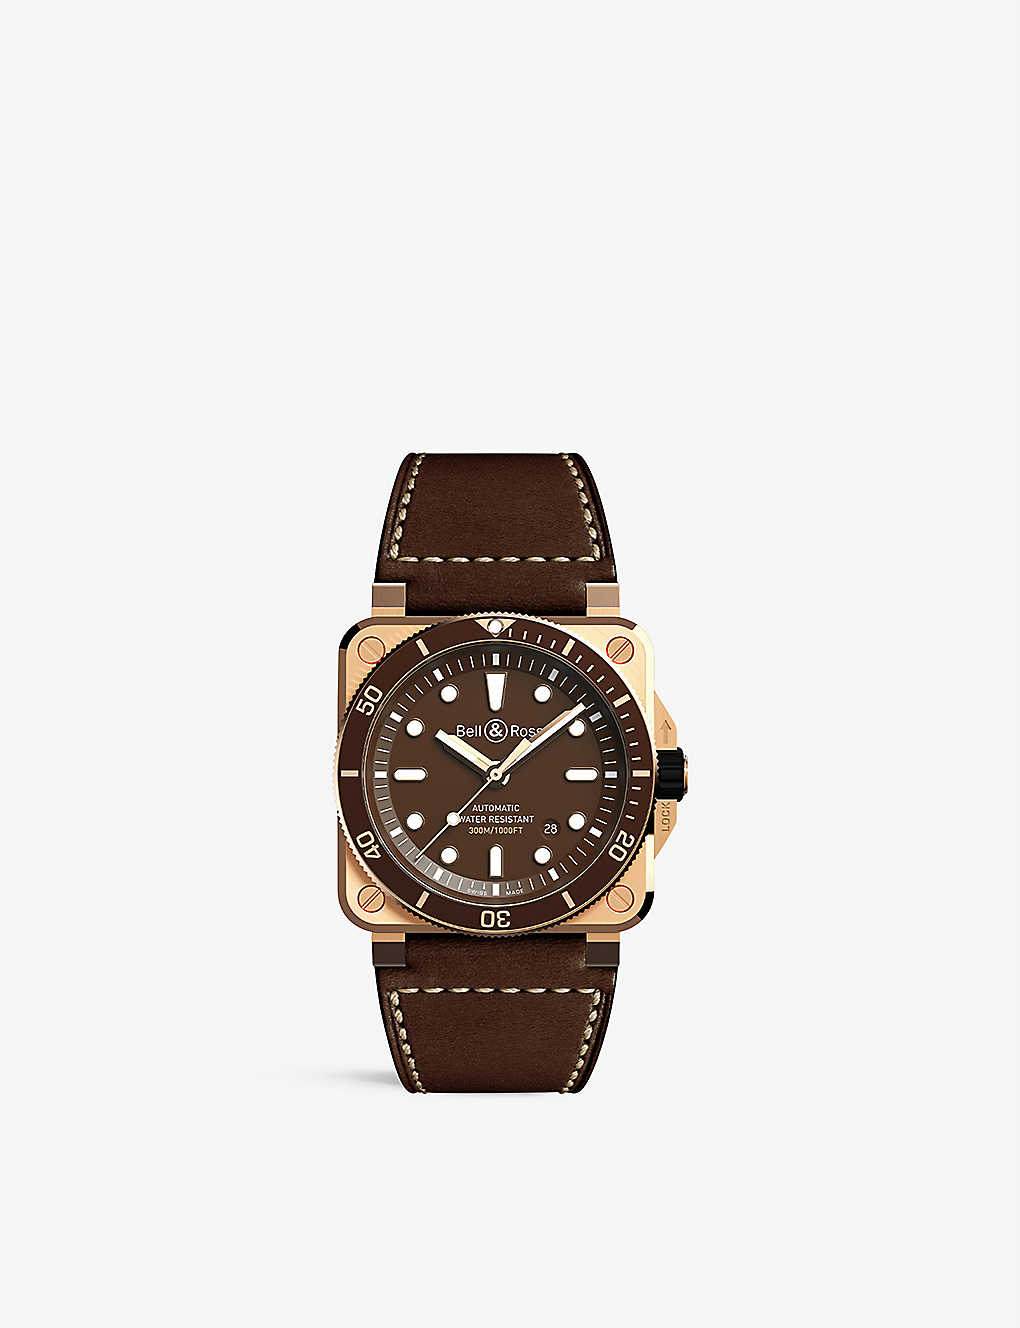 Bell & Ross Br 03-92 Diver Limited Edition Automatic 42mm Bronze And Leather Watch, Ref.no R0392-d-br-br/sca In Brown